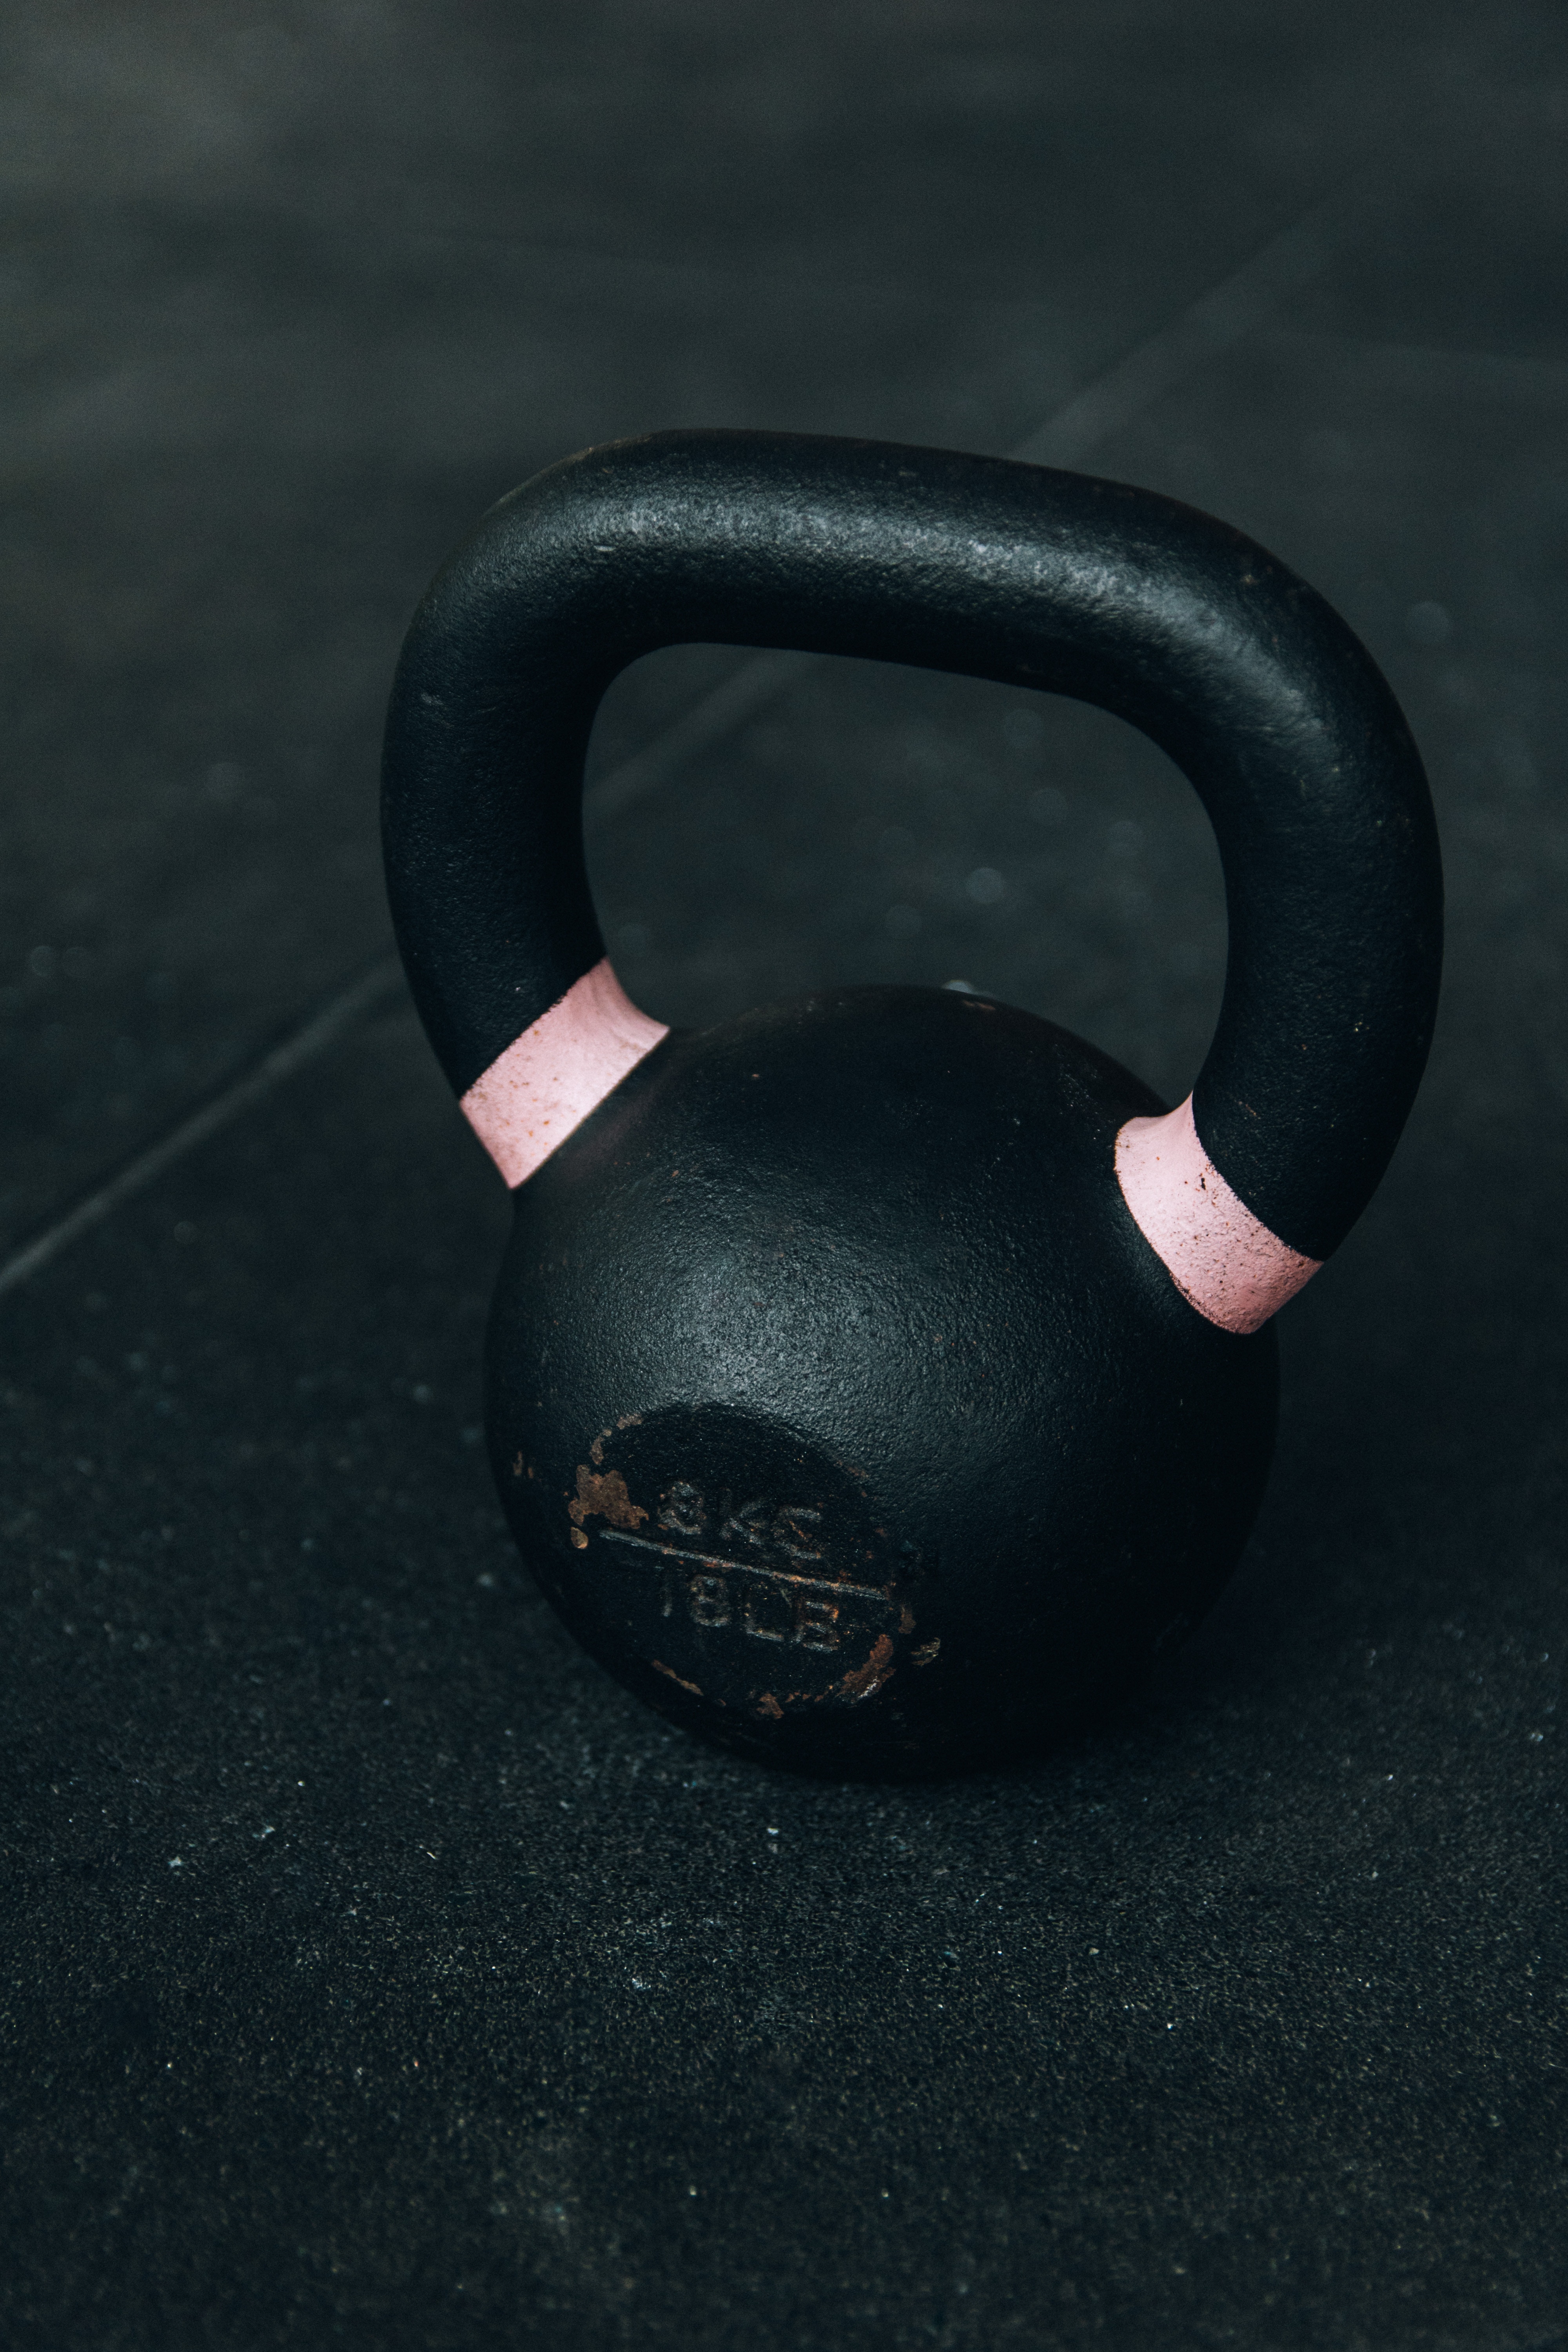 Download wallpaper 938x1668 girl dumbbells fitness gym iphone 876s6  for parallax hd background